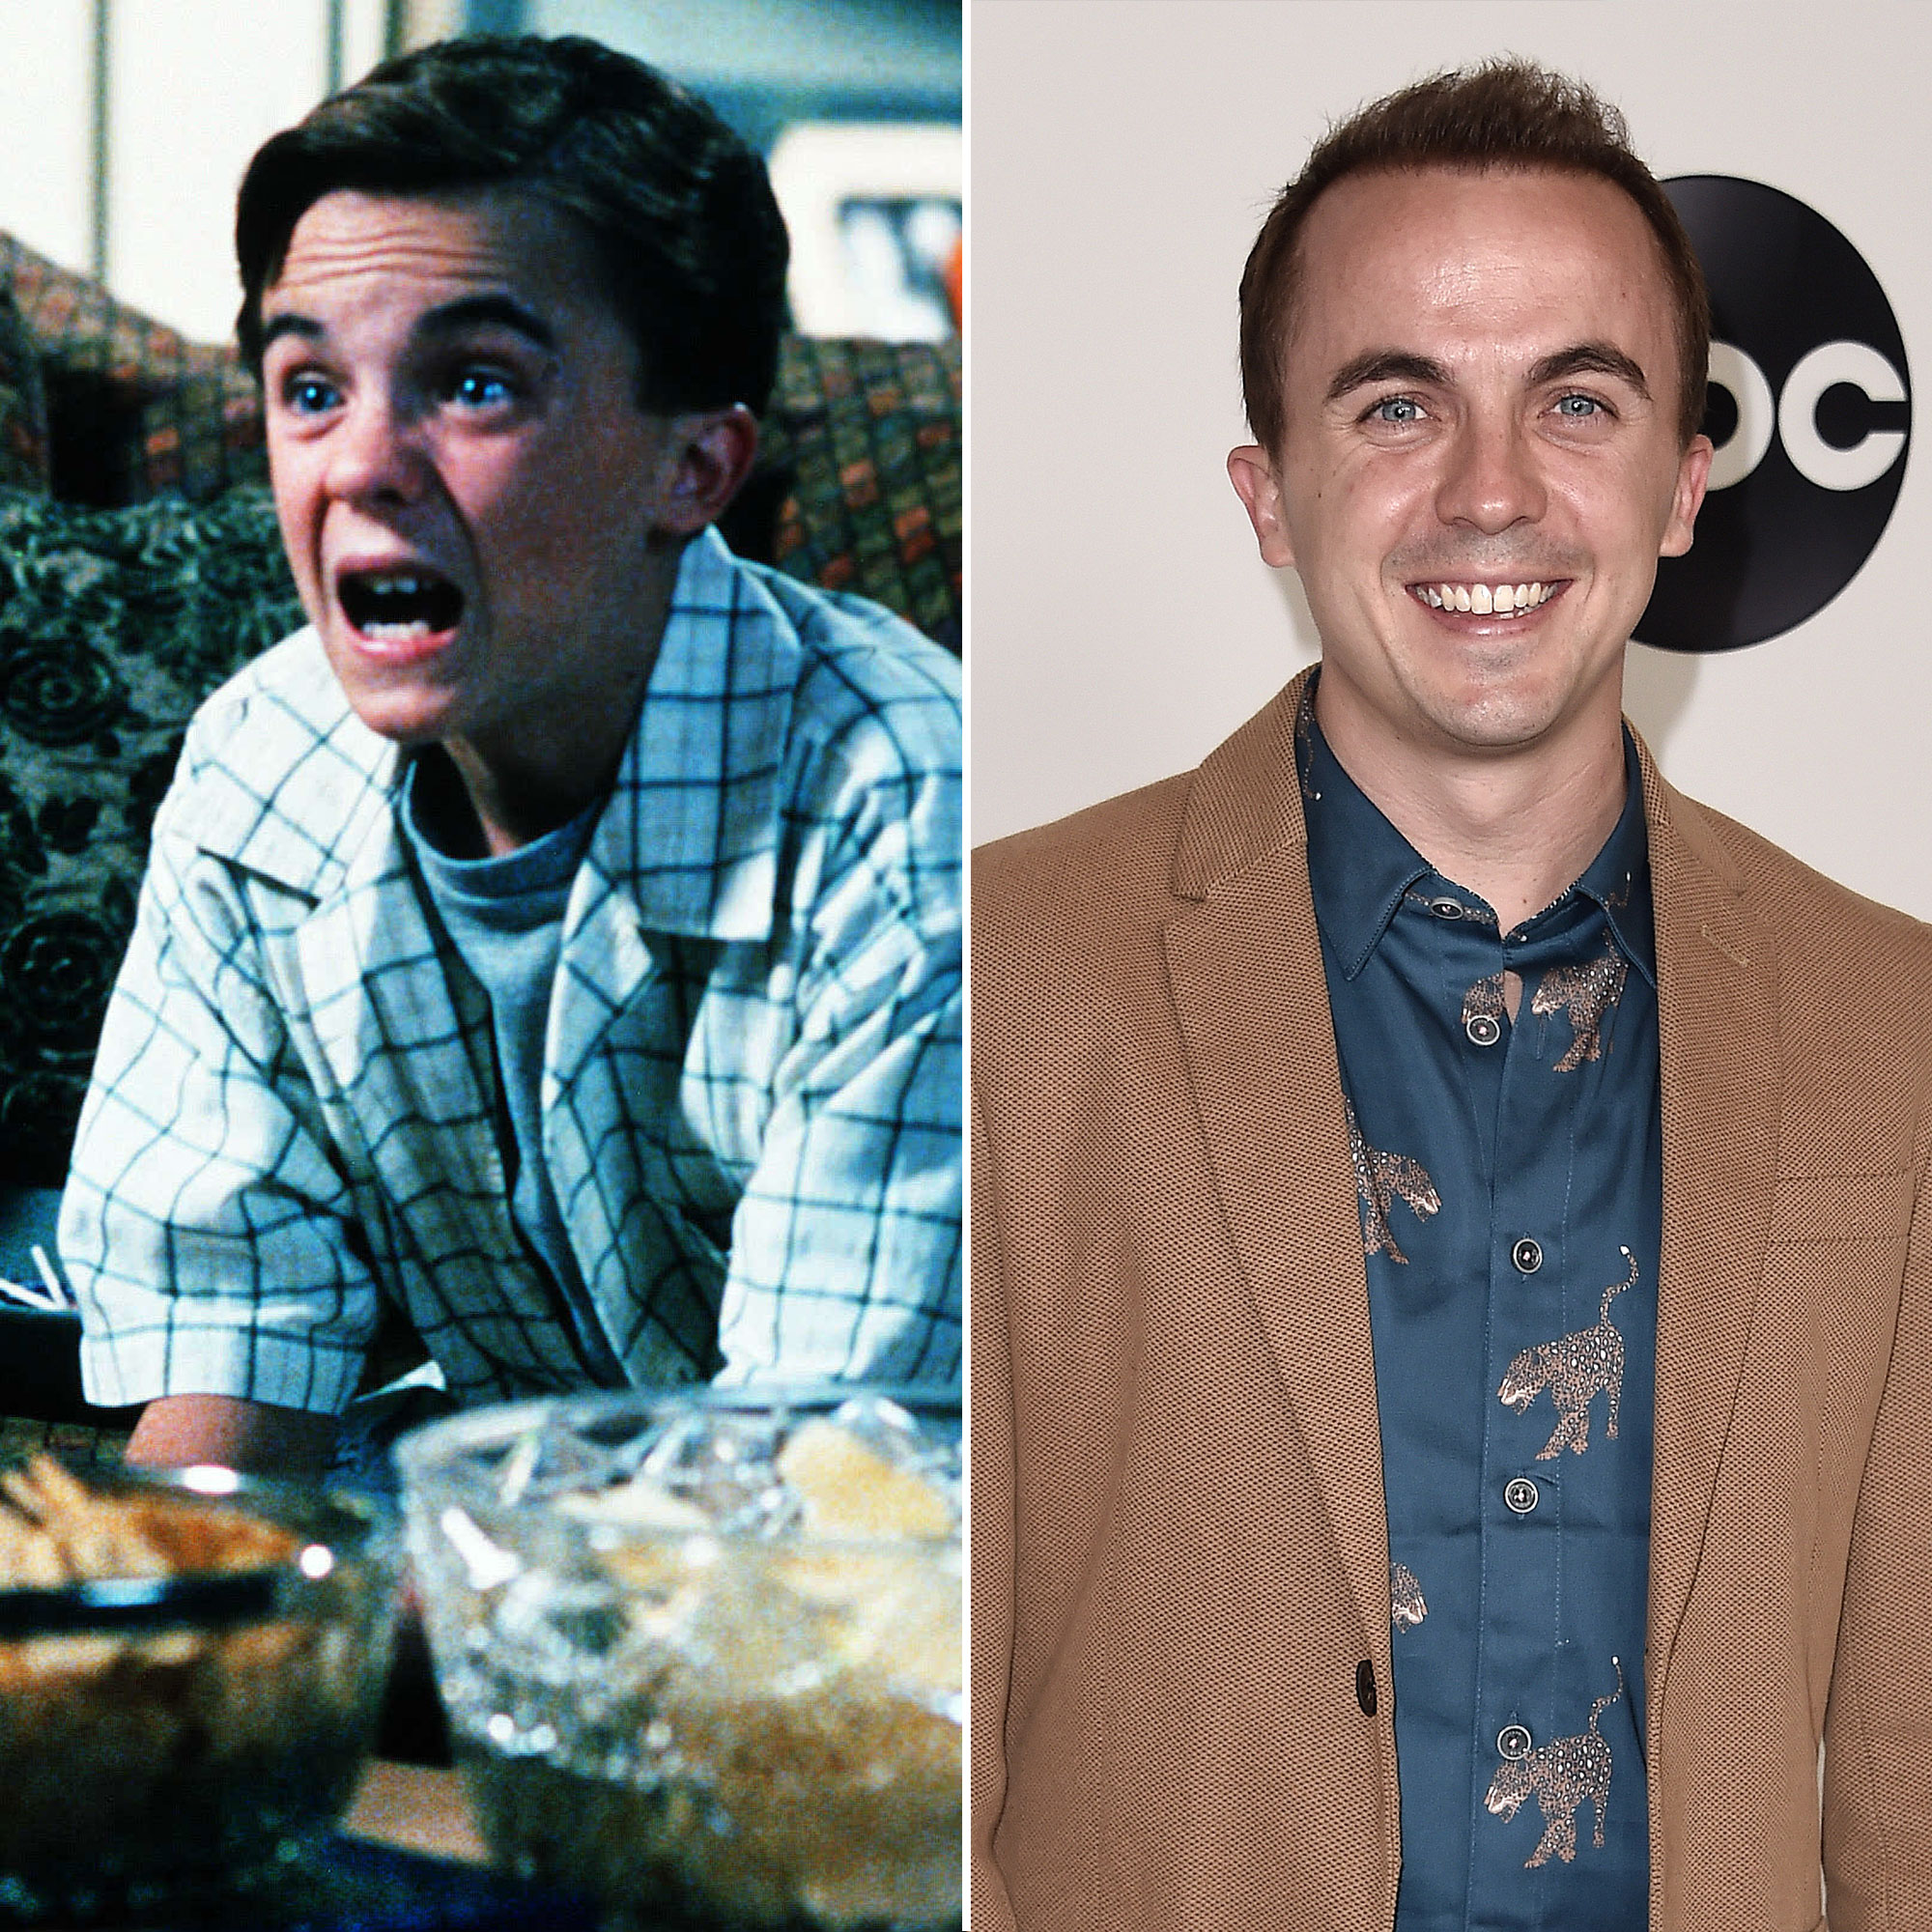 https://www.usmagazine.com/wp-content/uploads/2022/08/Frankie-Muniz-Malcolm-in-the-Middle-Cast-Where-Are-They-Now.jpg?quality=40&strip=all